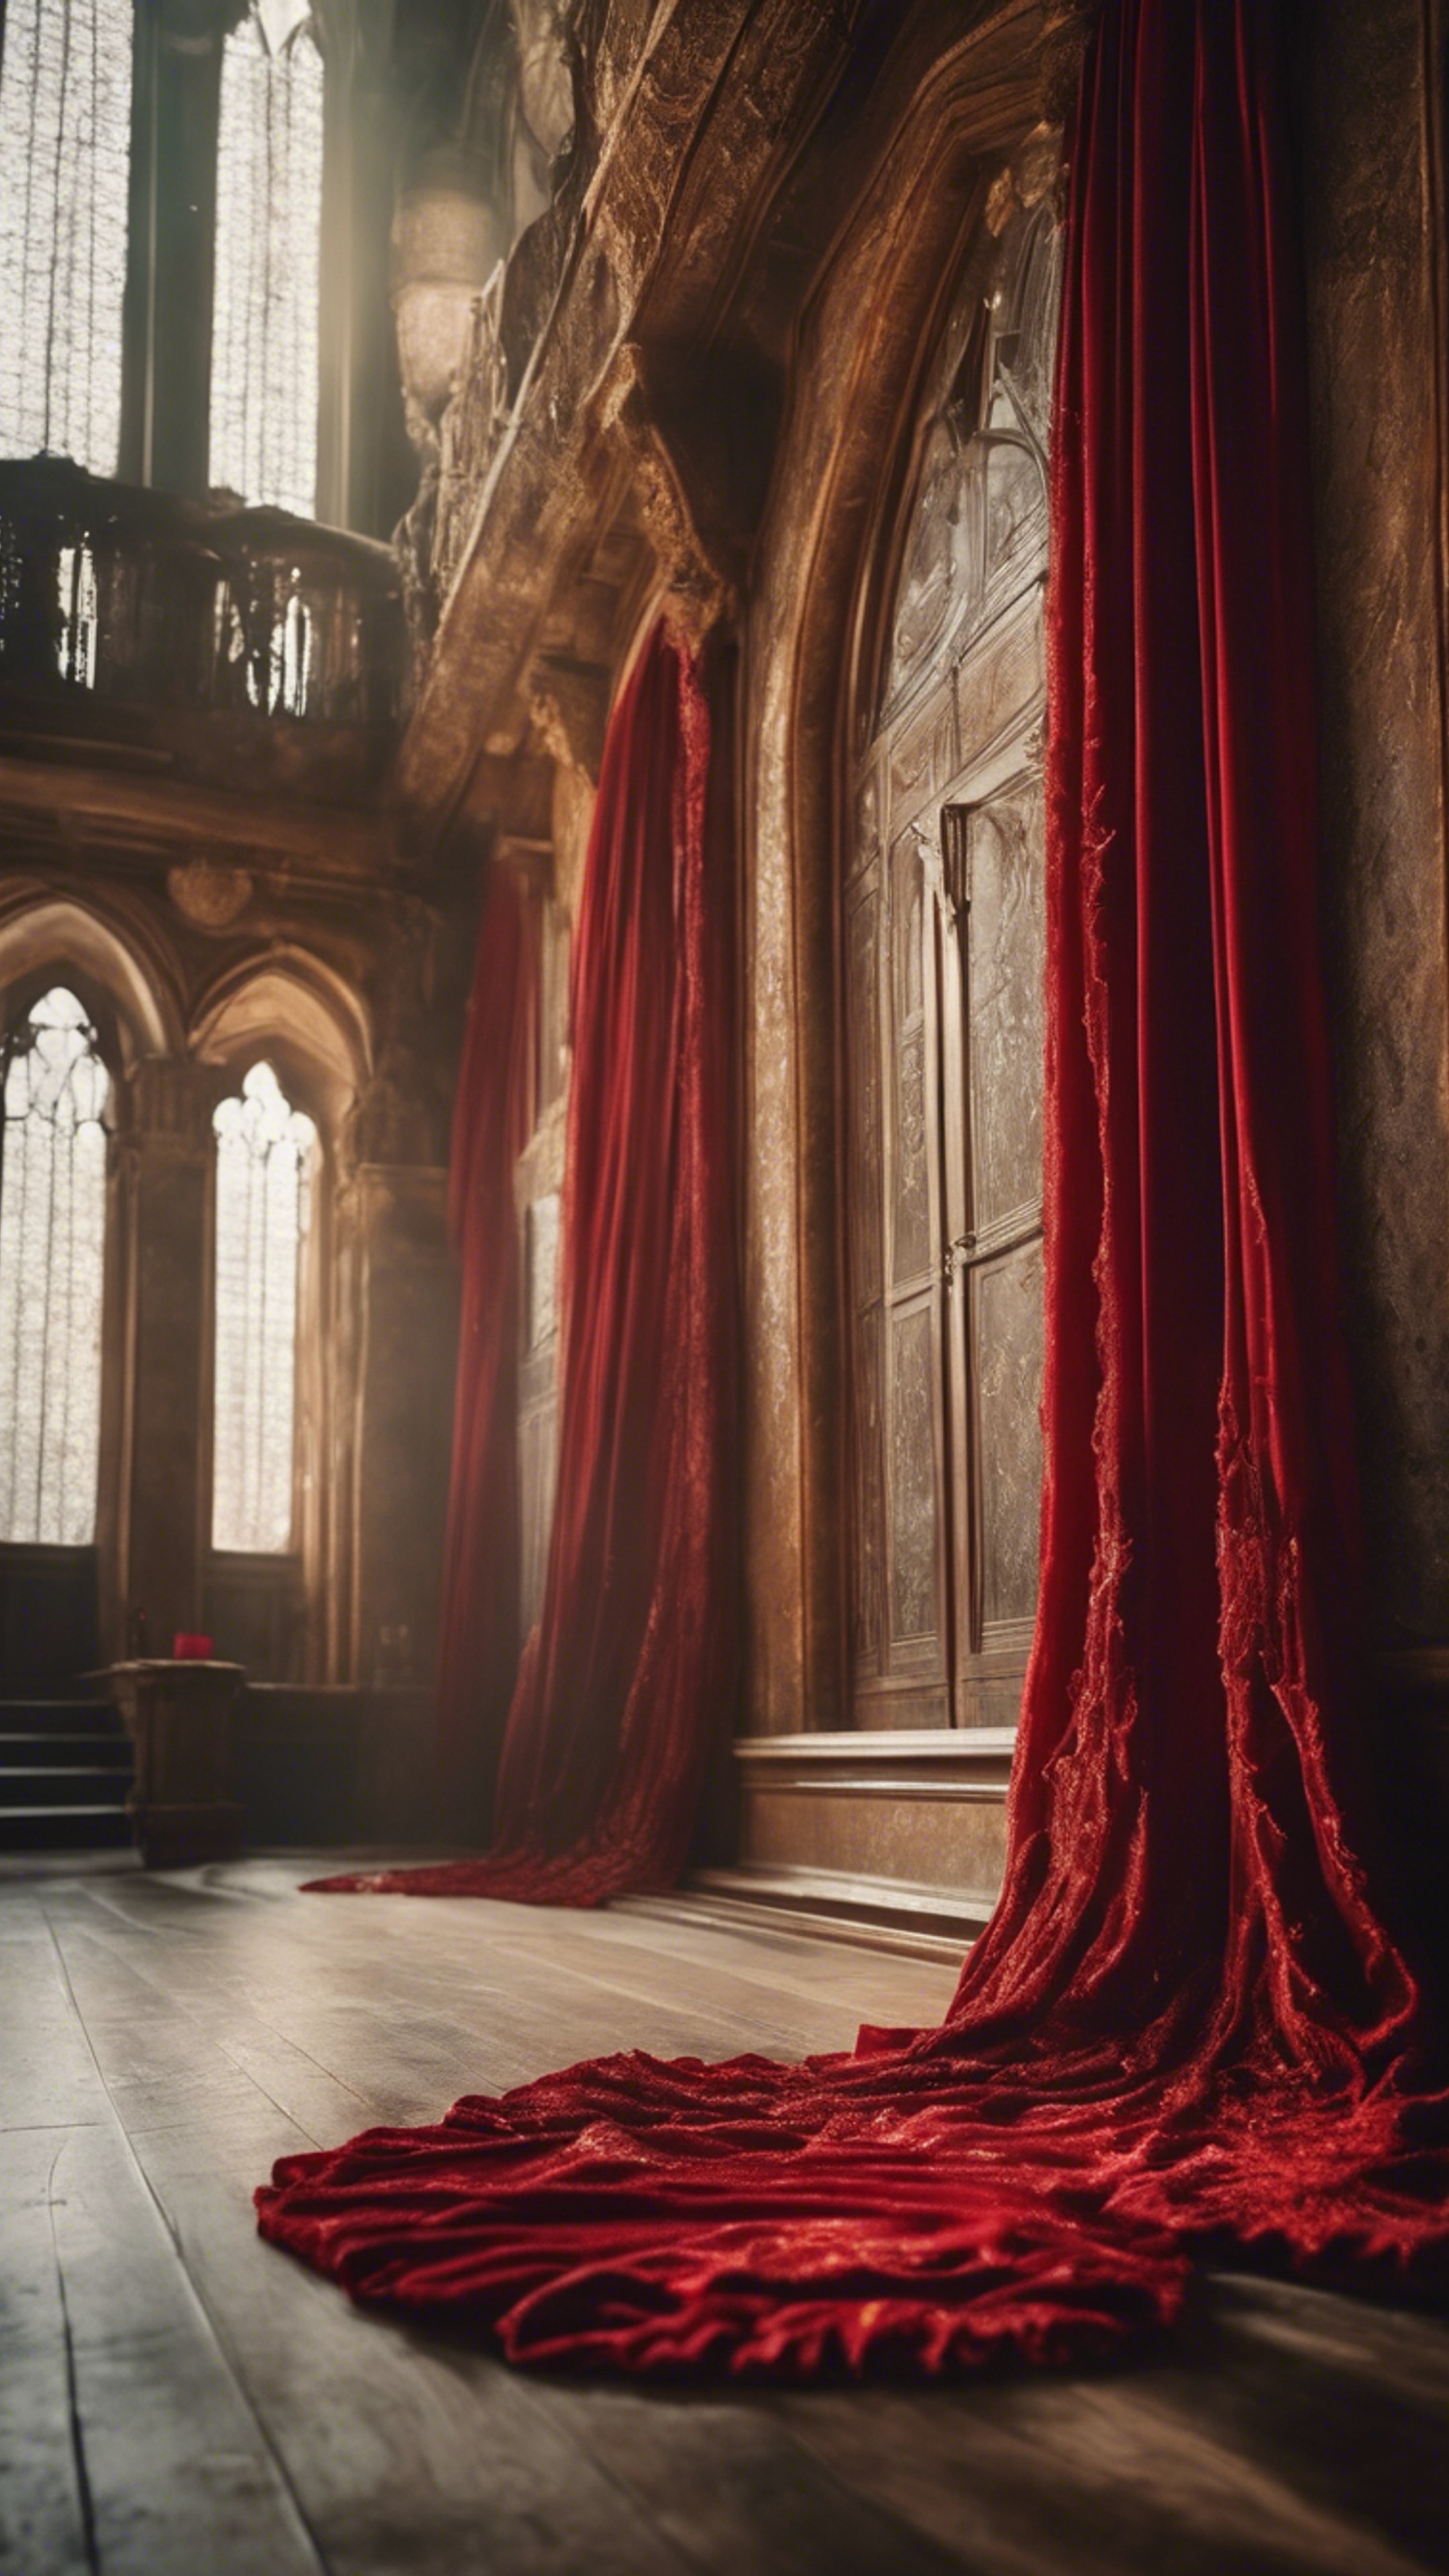 Golden-hued dust motes drifting through the air in a Gothic castle's grand hall, hitting swathes of red velvet curtains. Wallpaper[da57075d013744c3bf24]